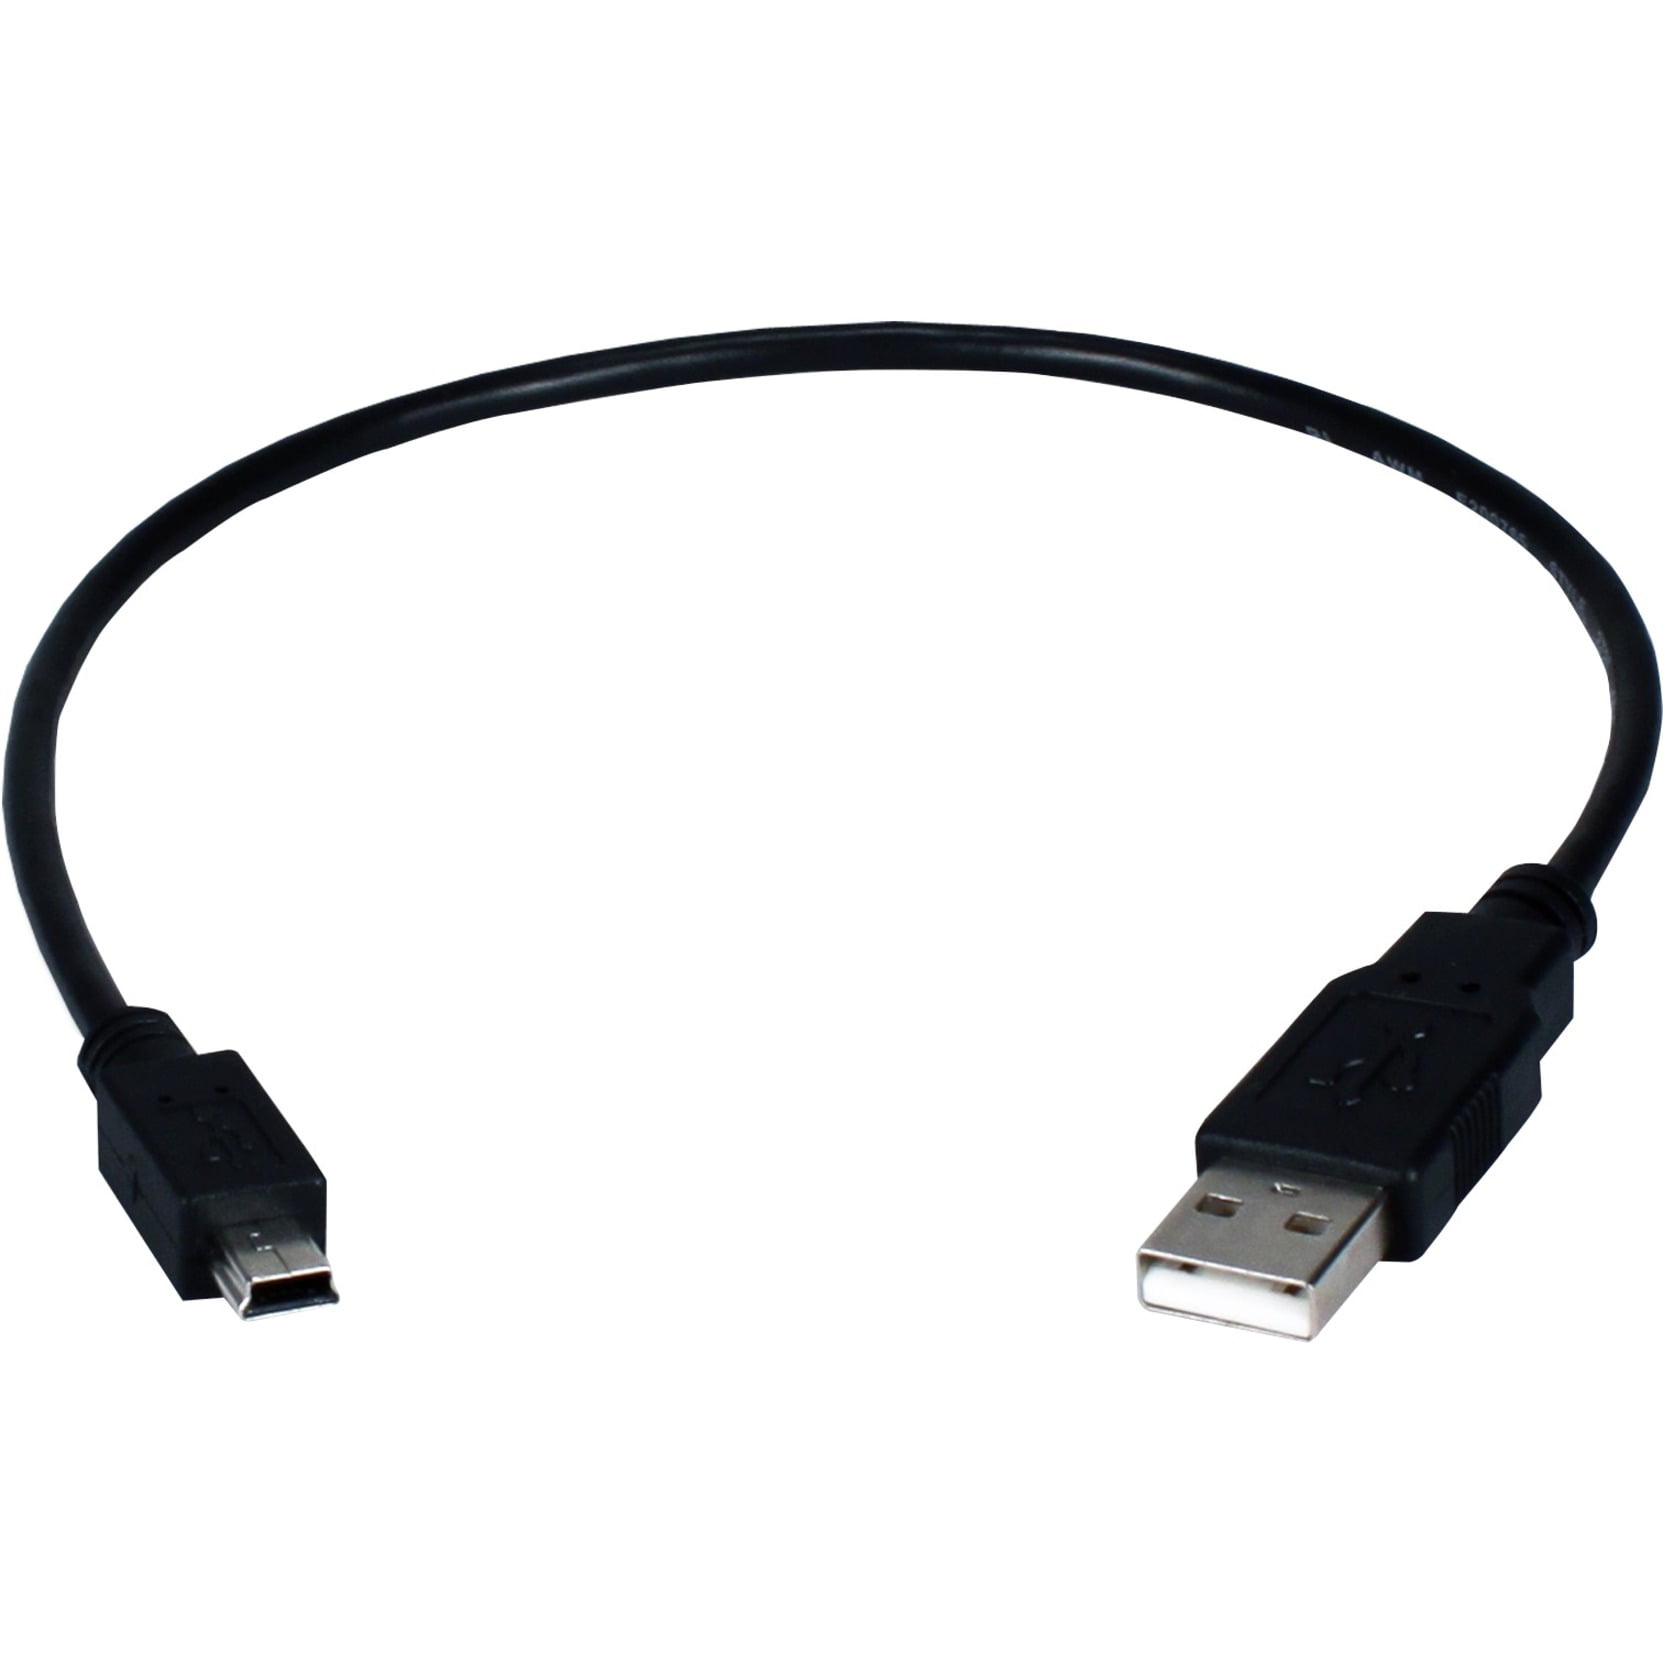 Speed Blue 30cm USB 2.0 Male A to Mini B 5-pin cable for MP3，PDA GPS 